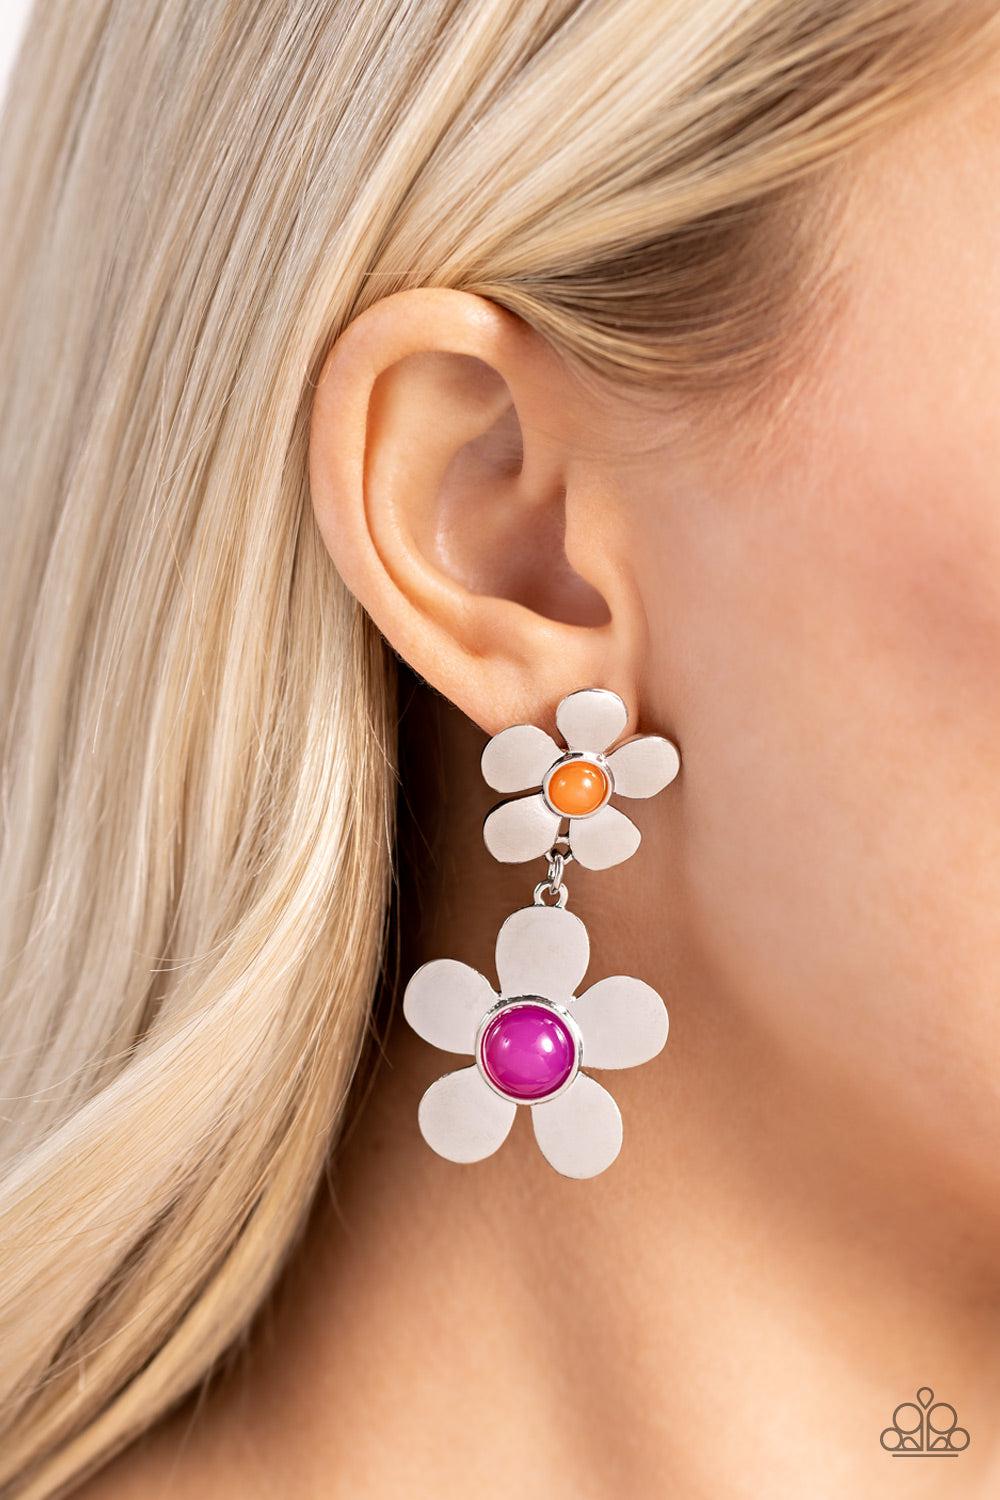 Fashionable Florals Pink &amp; Silver Flower Earrings - Paparazzi Accessories-on model - CarasShop.com - $5 Jewelry by Cara Jewels